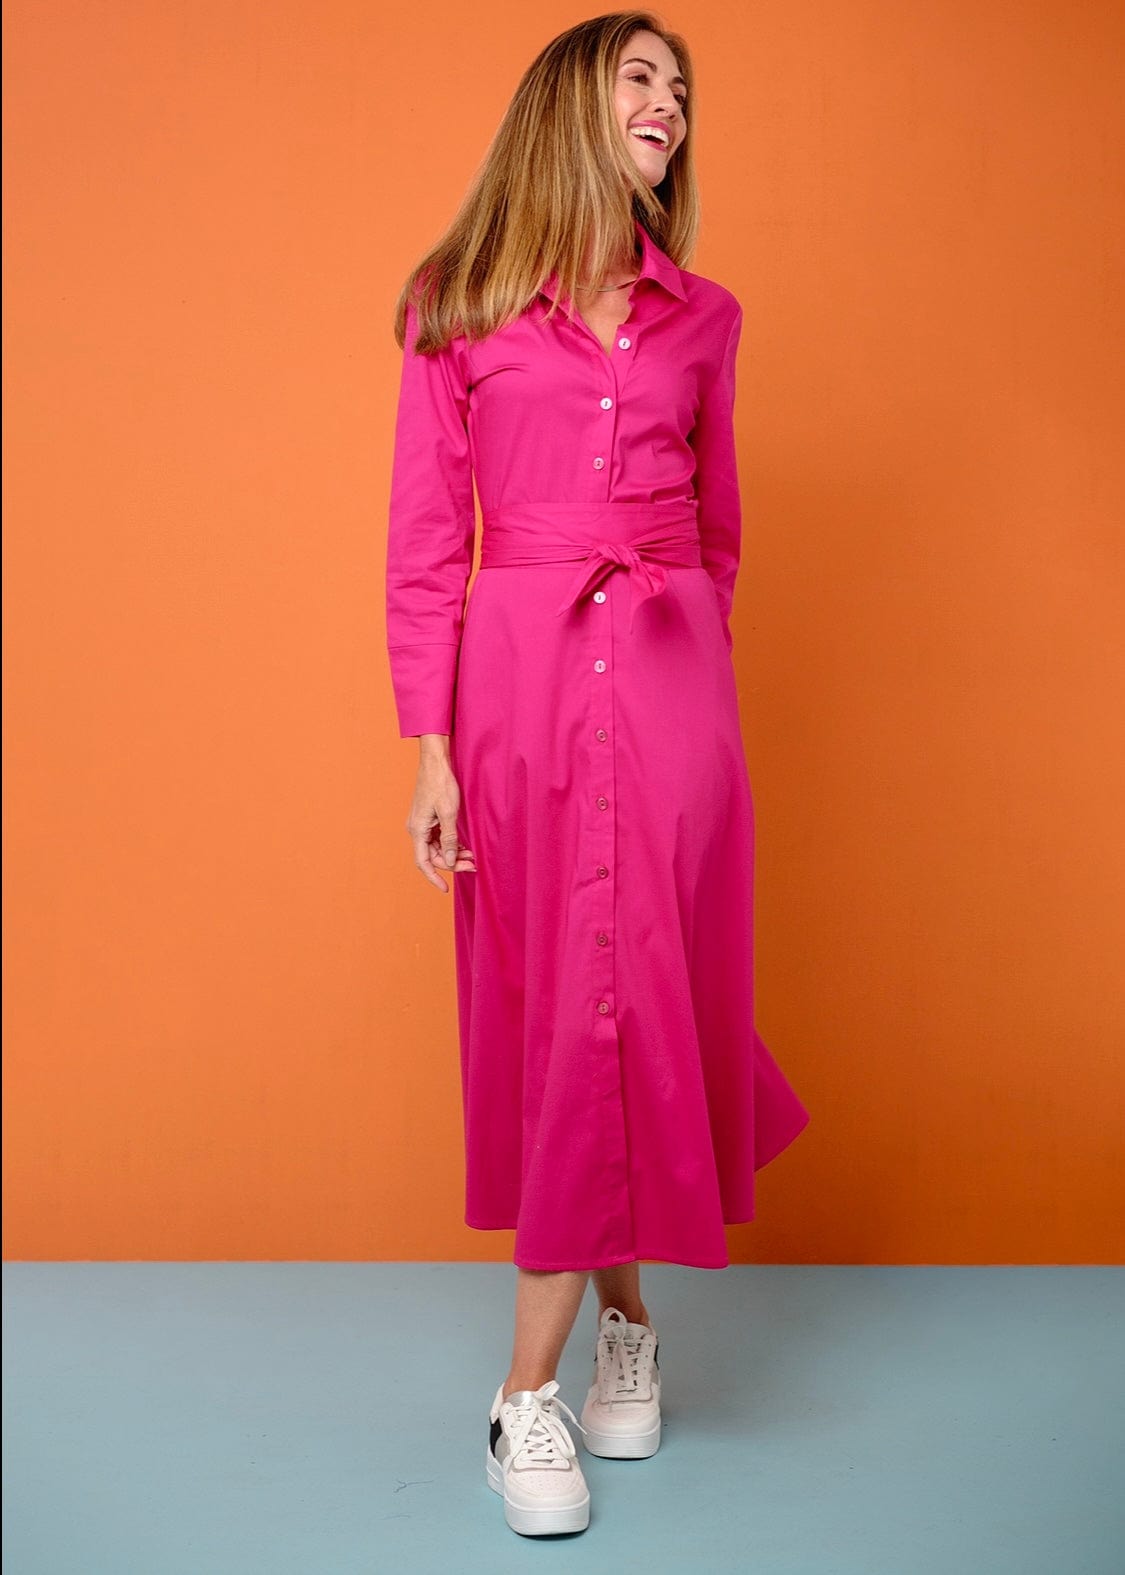 ICONIC DRESSES Button up Midi Shirt Dress With Sash In Cerise Button up Midi Shirt Dress With Sash In Cerise - DRESSES Tribute Store